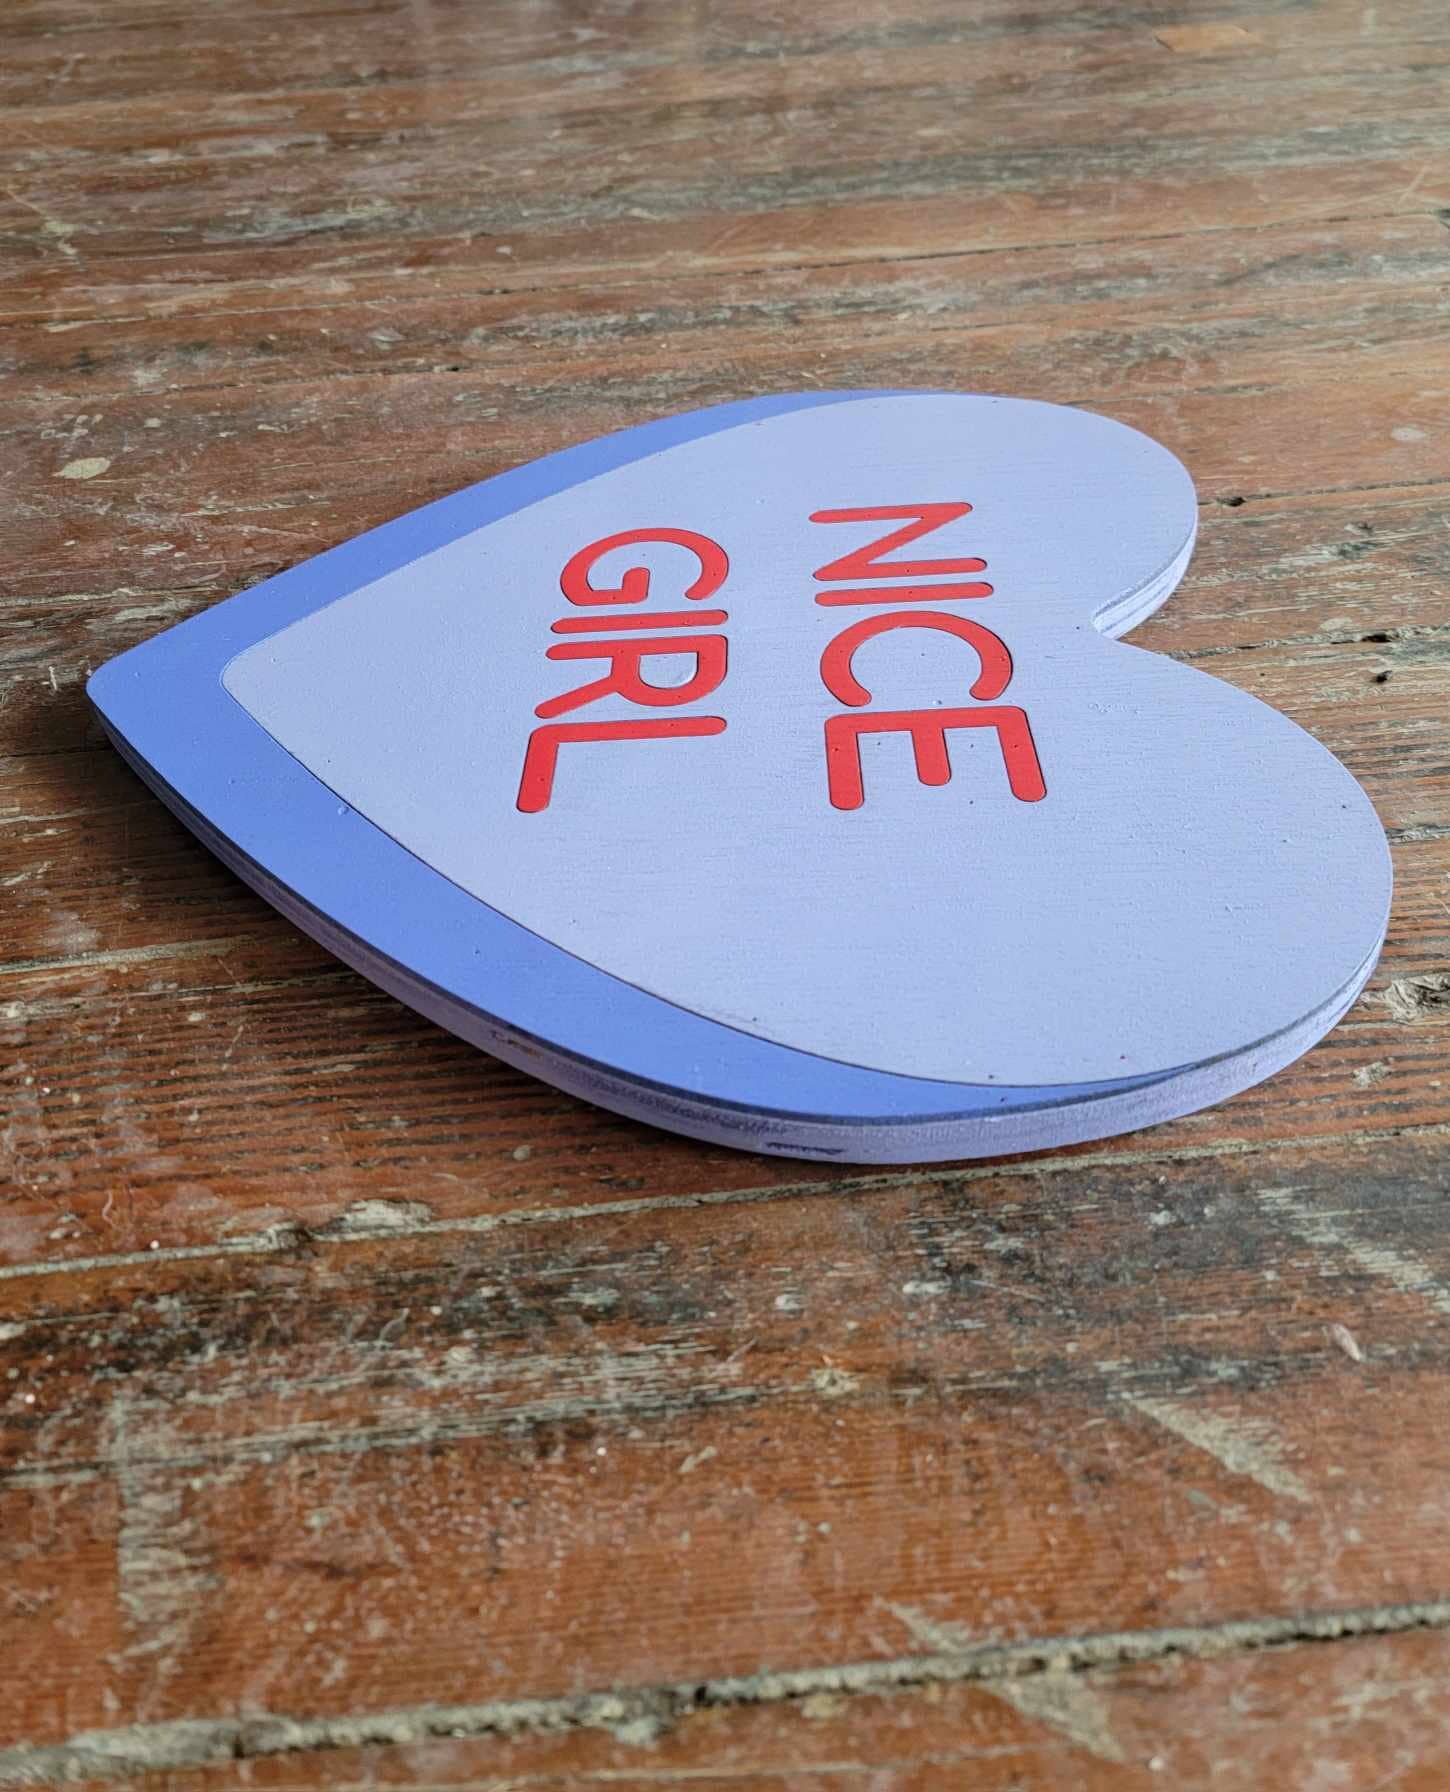 Wooden Purple Nice girl Candy Conversation Heart Cutout Valentines Day Gift Photography Prop Handmade Homedecor Raised 3D Sign Wall Art